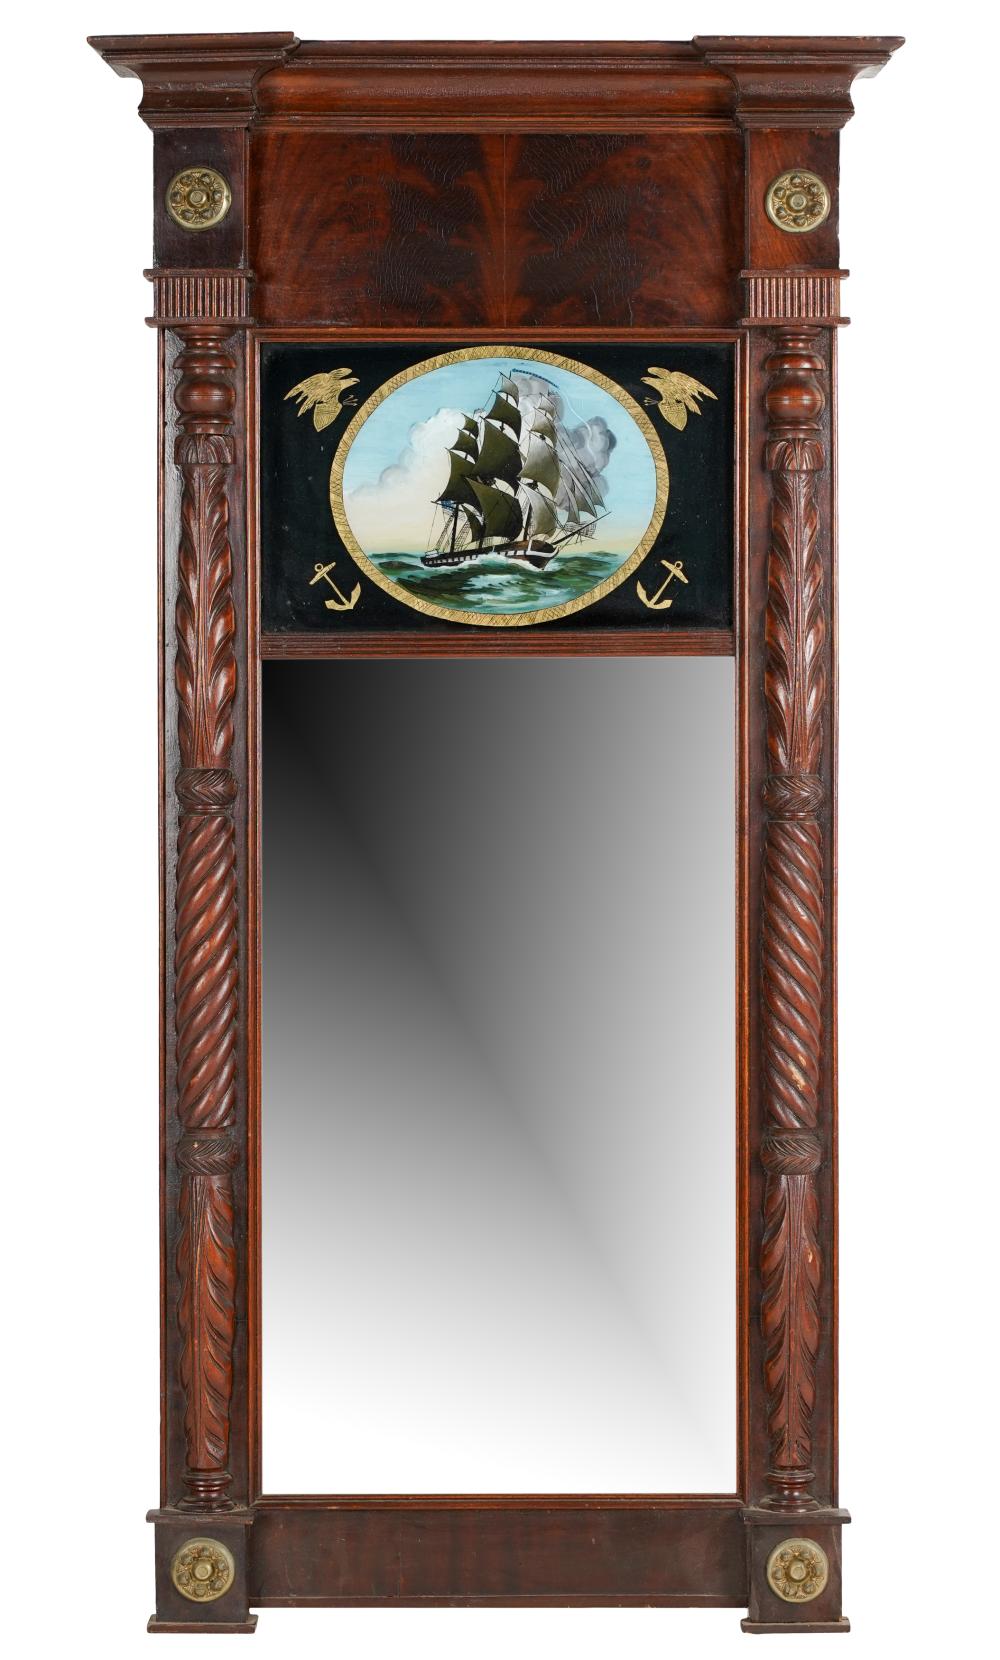 MAHOGANY PAINTED GLASS PIER MIRRORdepicting 3256f4